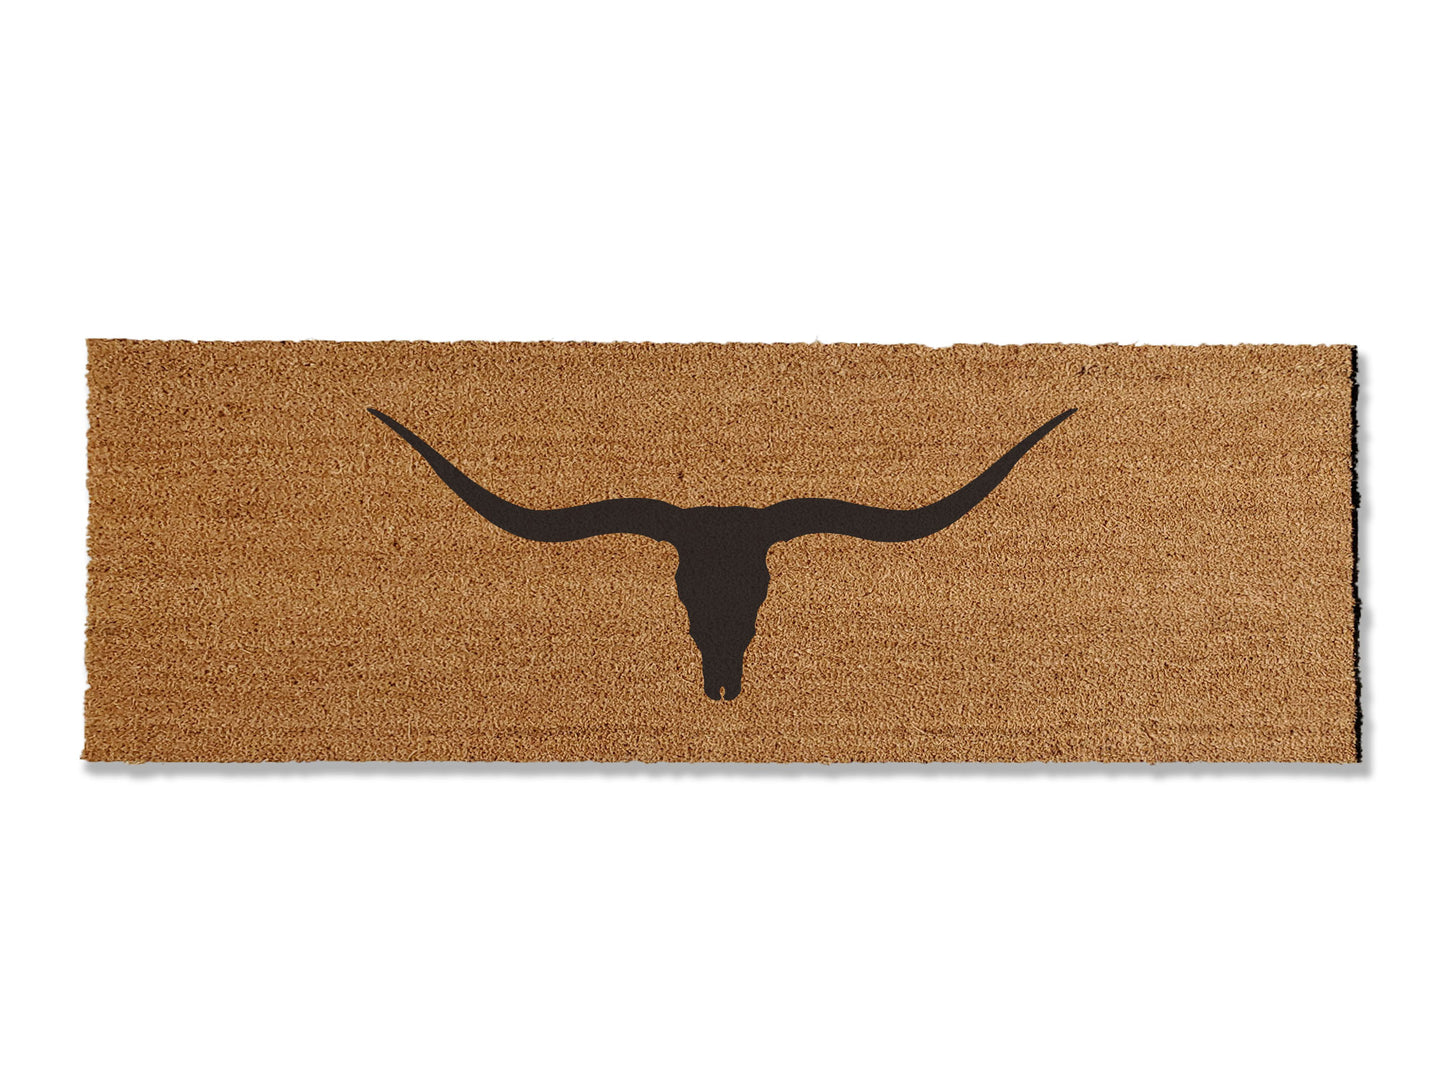 Infuse a touch of southwestern charm with our coir doormat showcasing a Texas Longhorn skull. Available in multiple sizes, this rustic design adds character to your doorstep. With its effective dirt-trapping capabilities, this mat combines style and functionality to enhance your entryway.